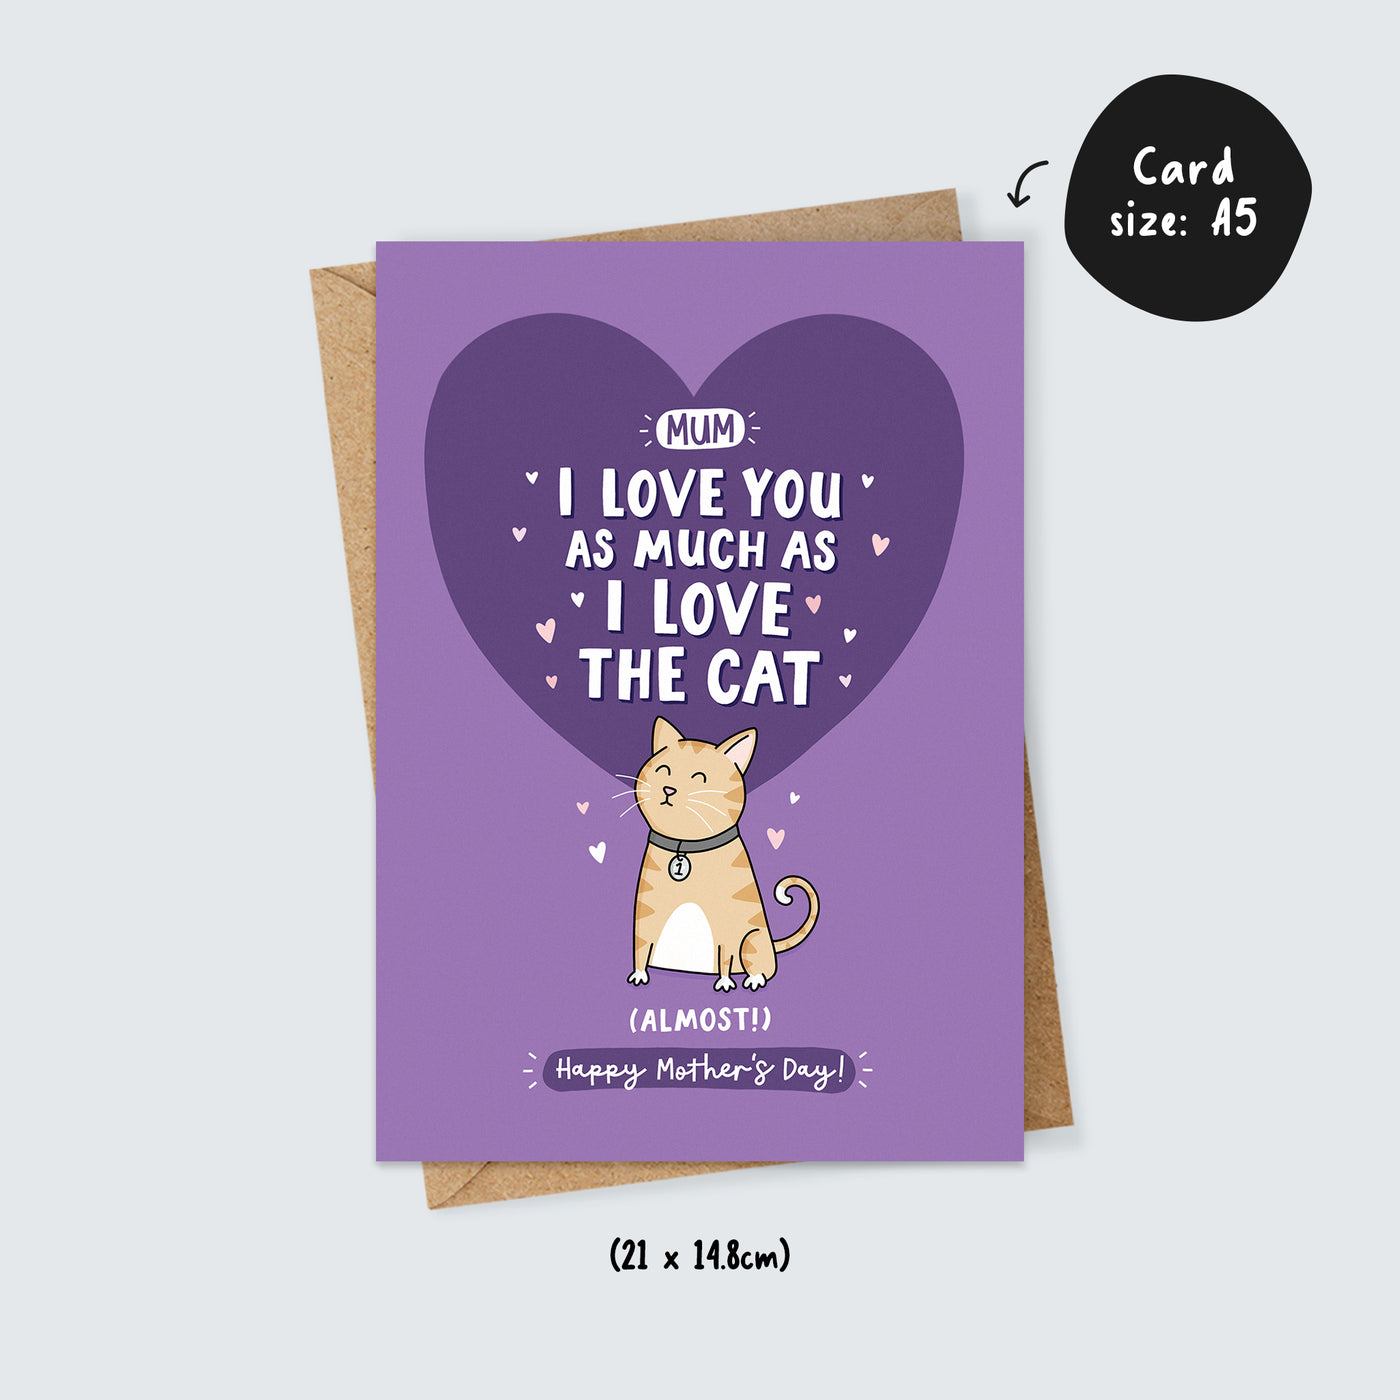 Mum I Love You as Much as I Love the Cat (Almost!) Mother's Day Card